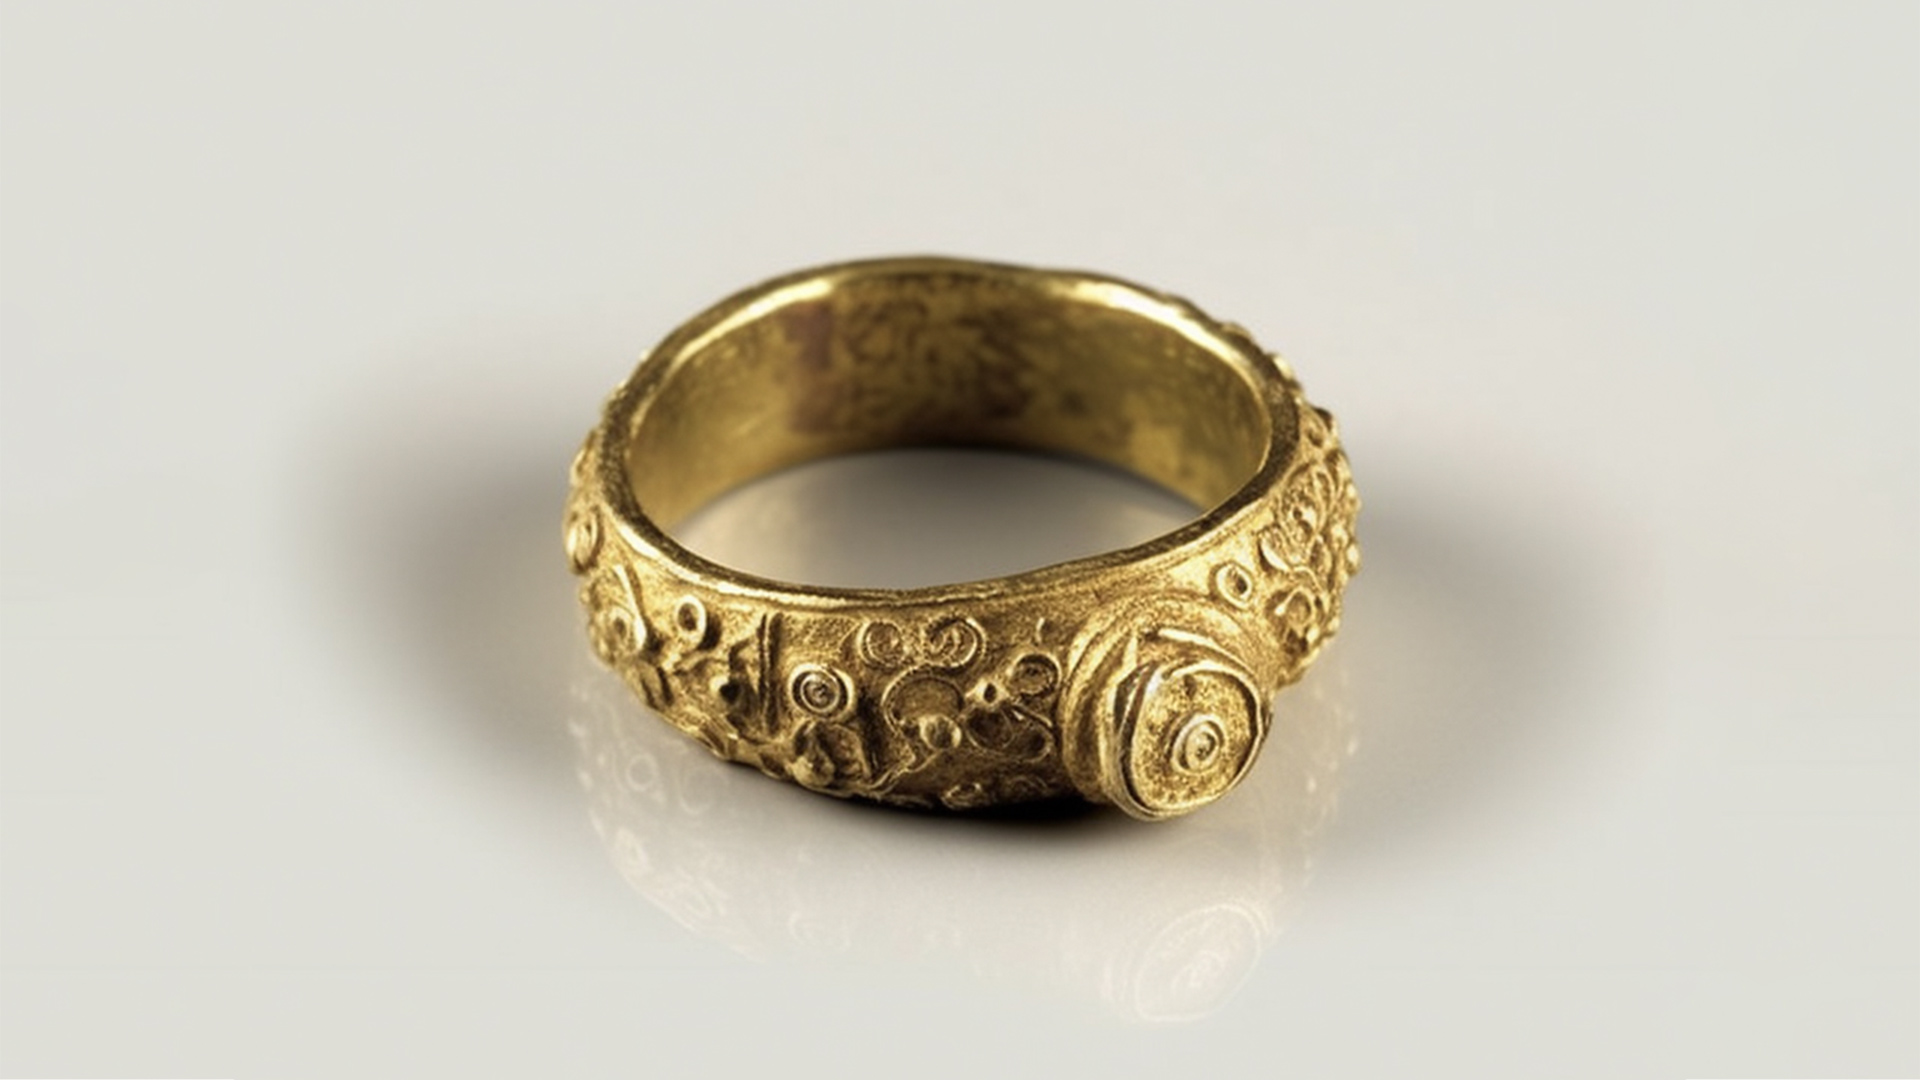 Gold ring decorated with filigree